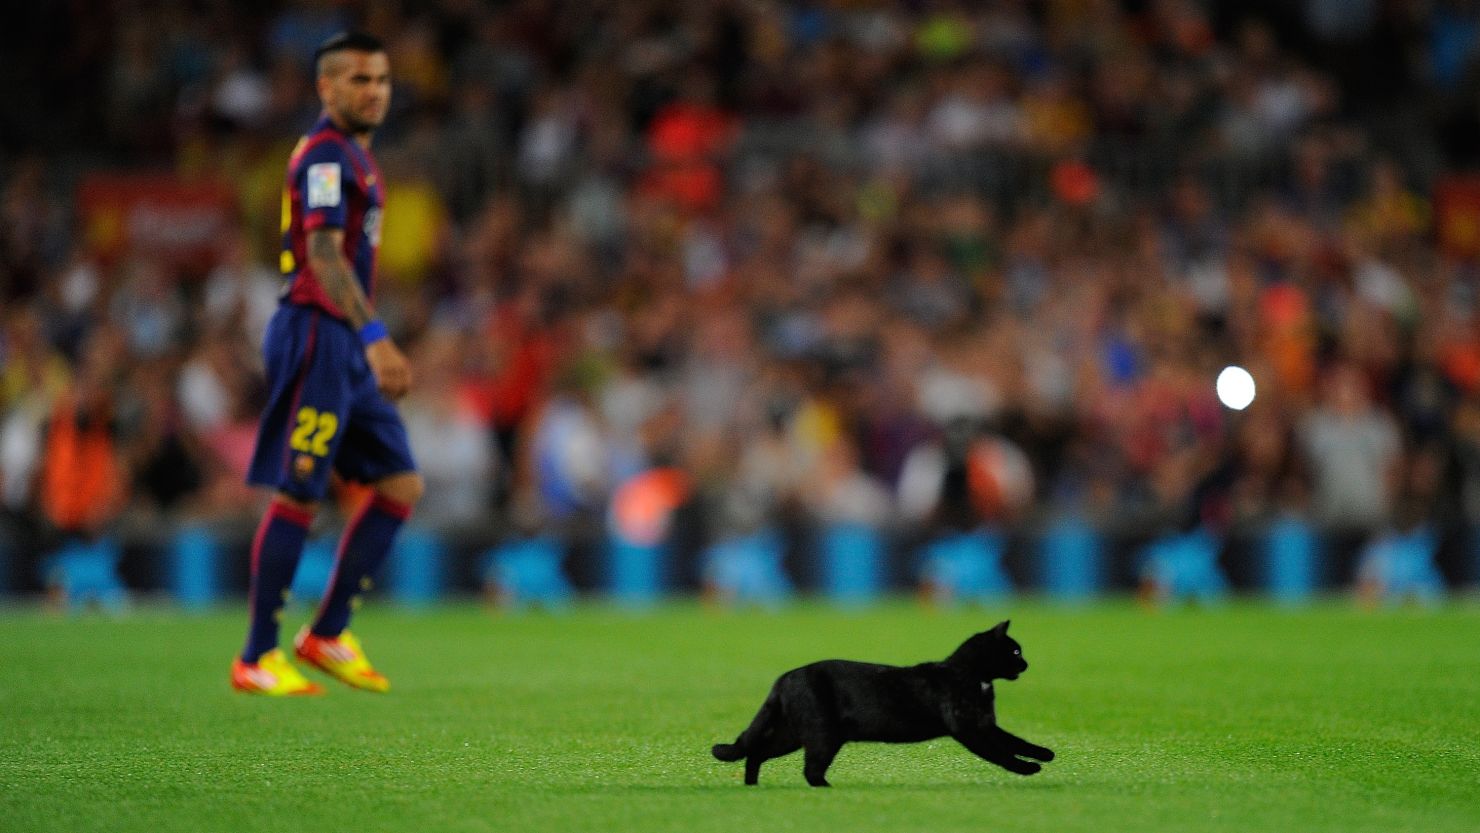 A black cat inavded the pitch before the Barca game, but brought no bad omesn as they won 3-0